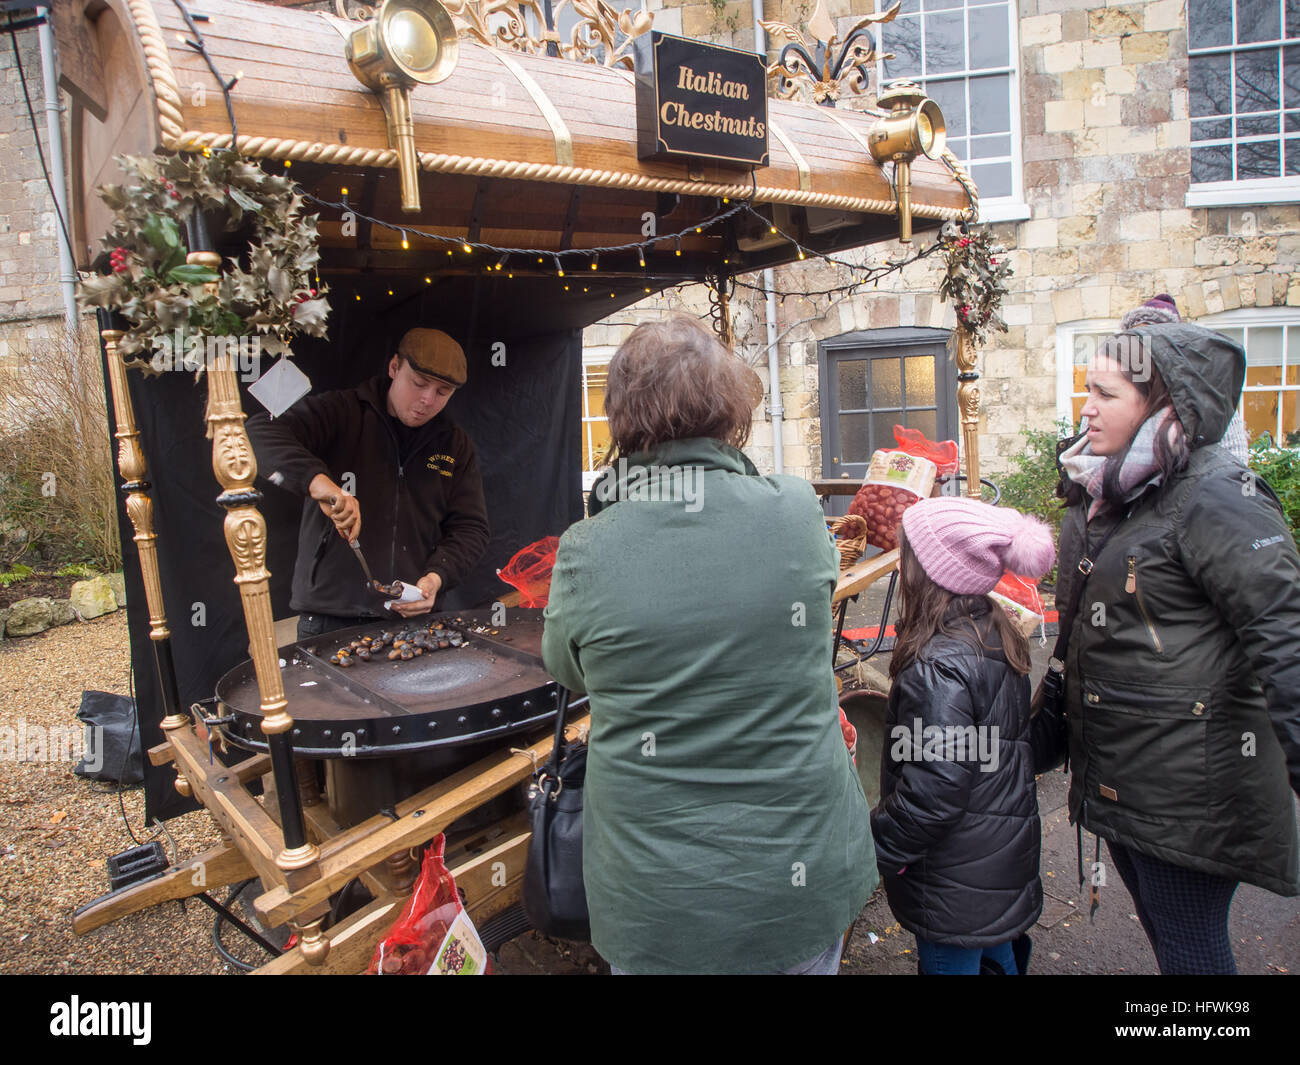 A traditional roasted chestnut stall at a winter market. Stock Photo